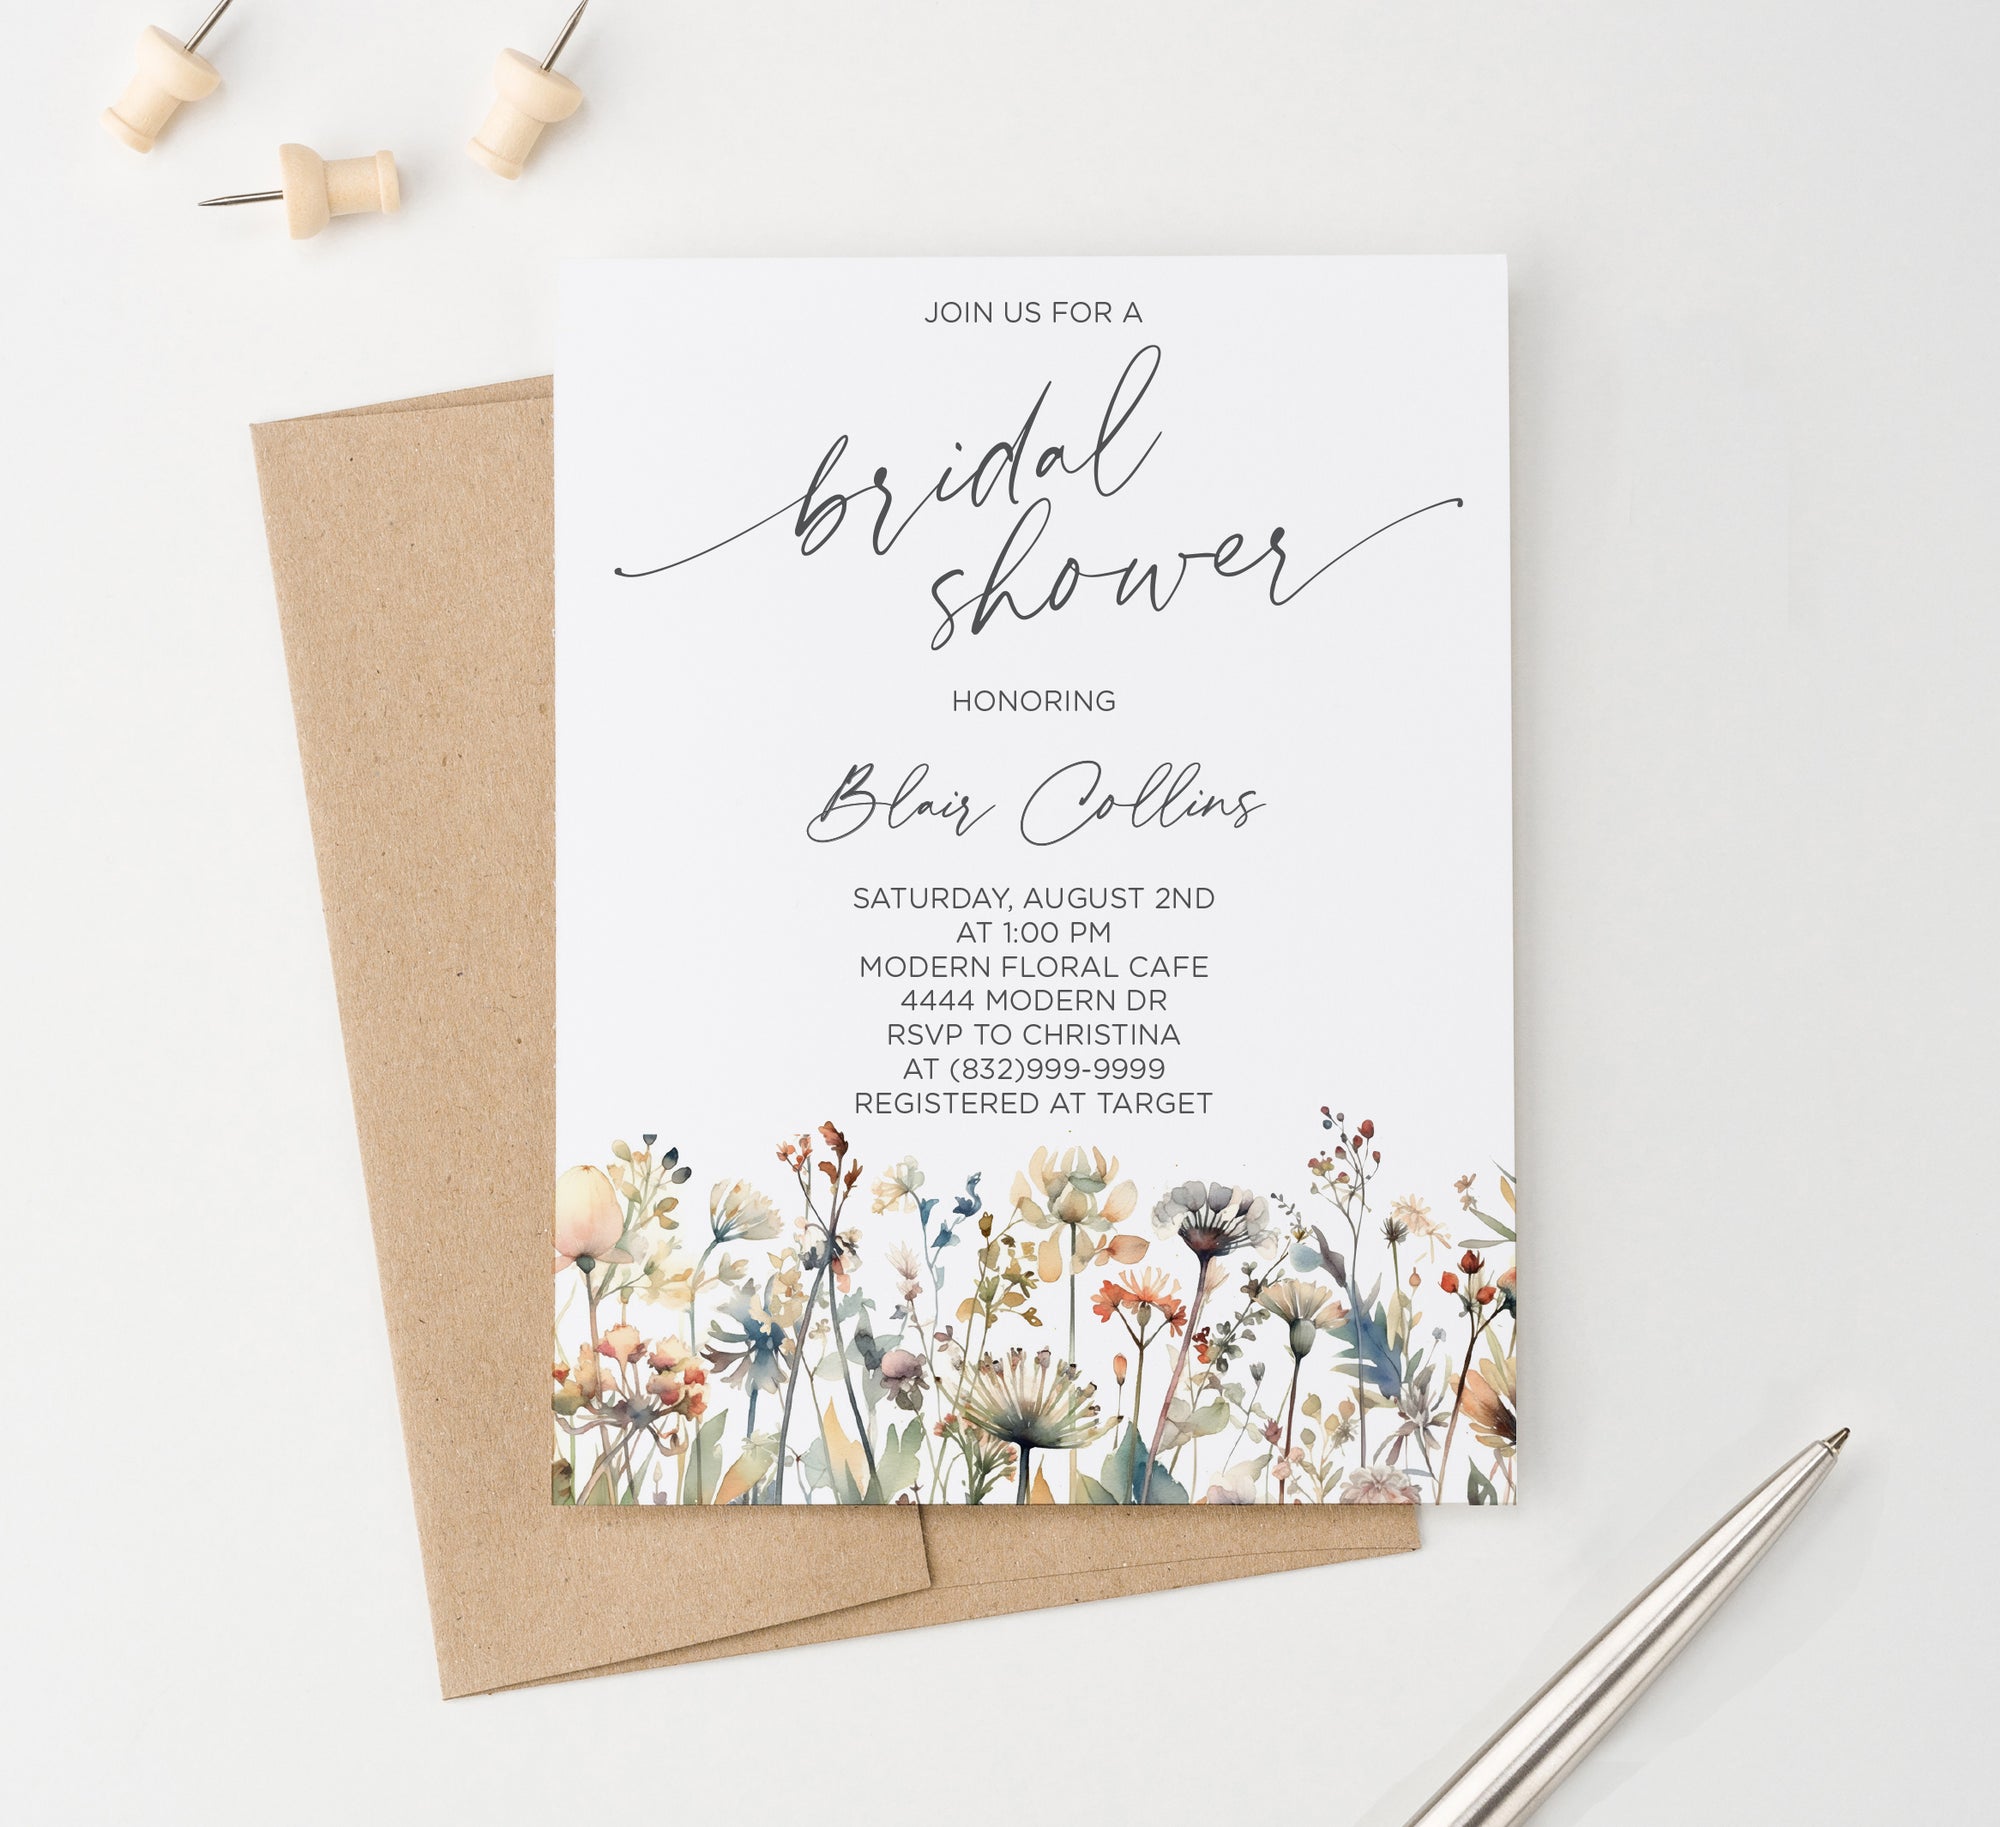 Personalized Bridal Shower Invitations With Wildflowers